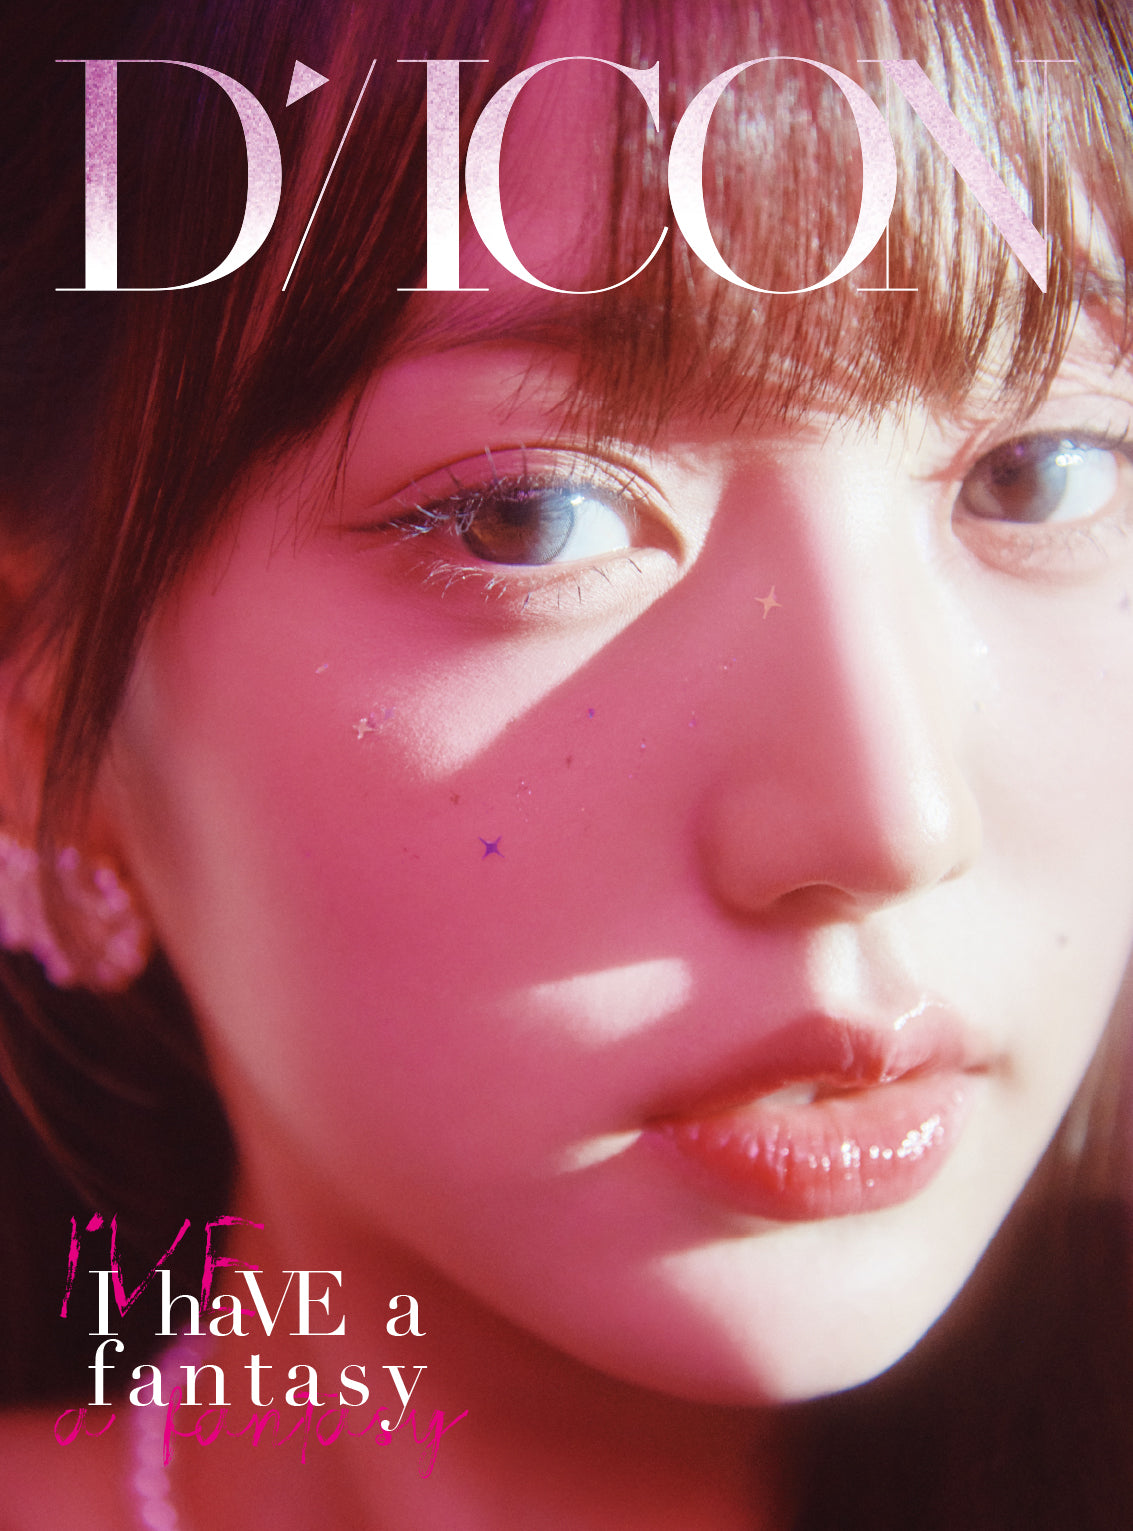 IVE - DICON N°20 IVE B TYPE JANG WONYOUNG COVER